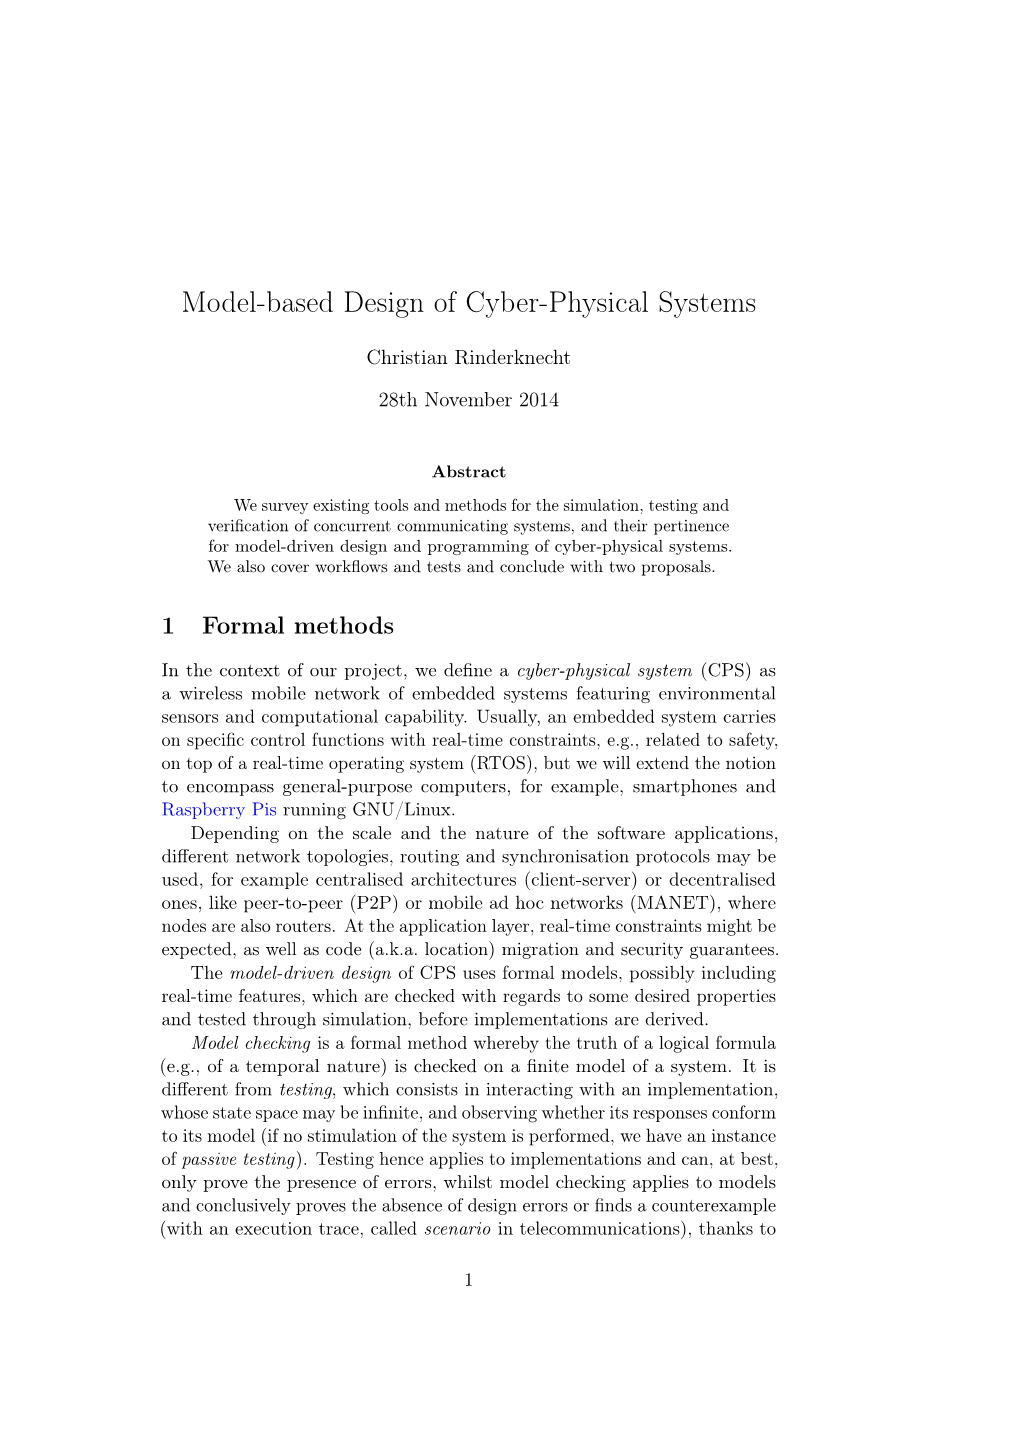 Model-Based Design of Cyber-Physical Systems